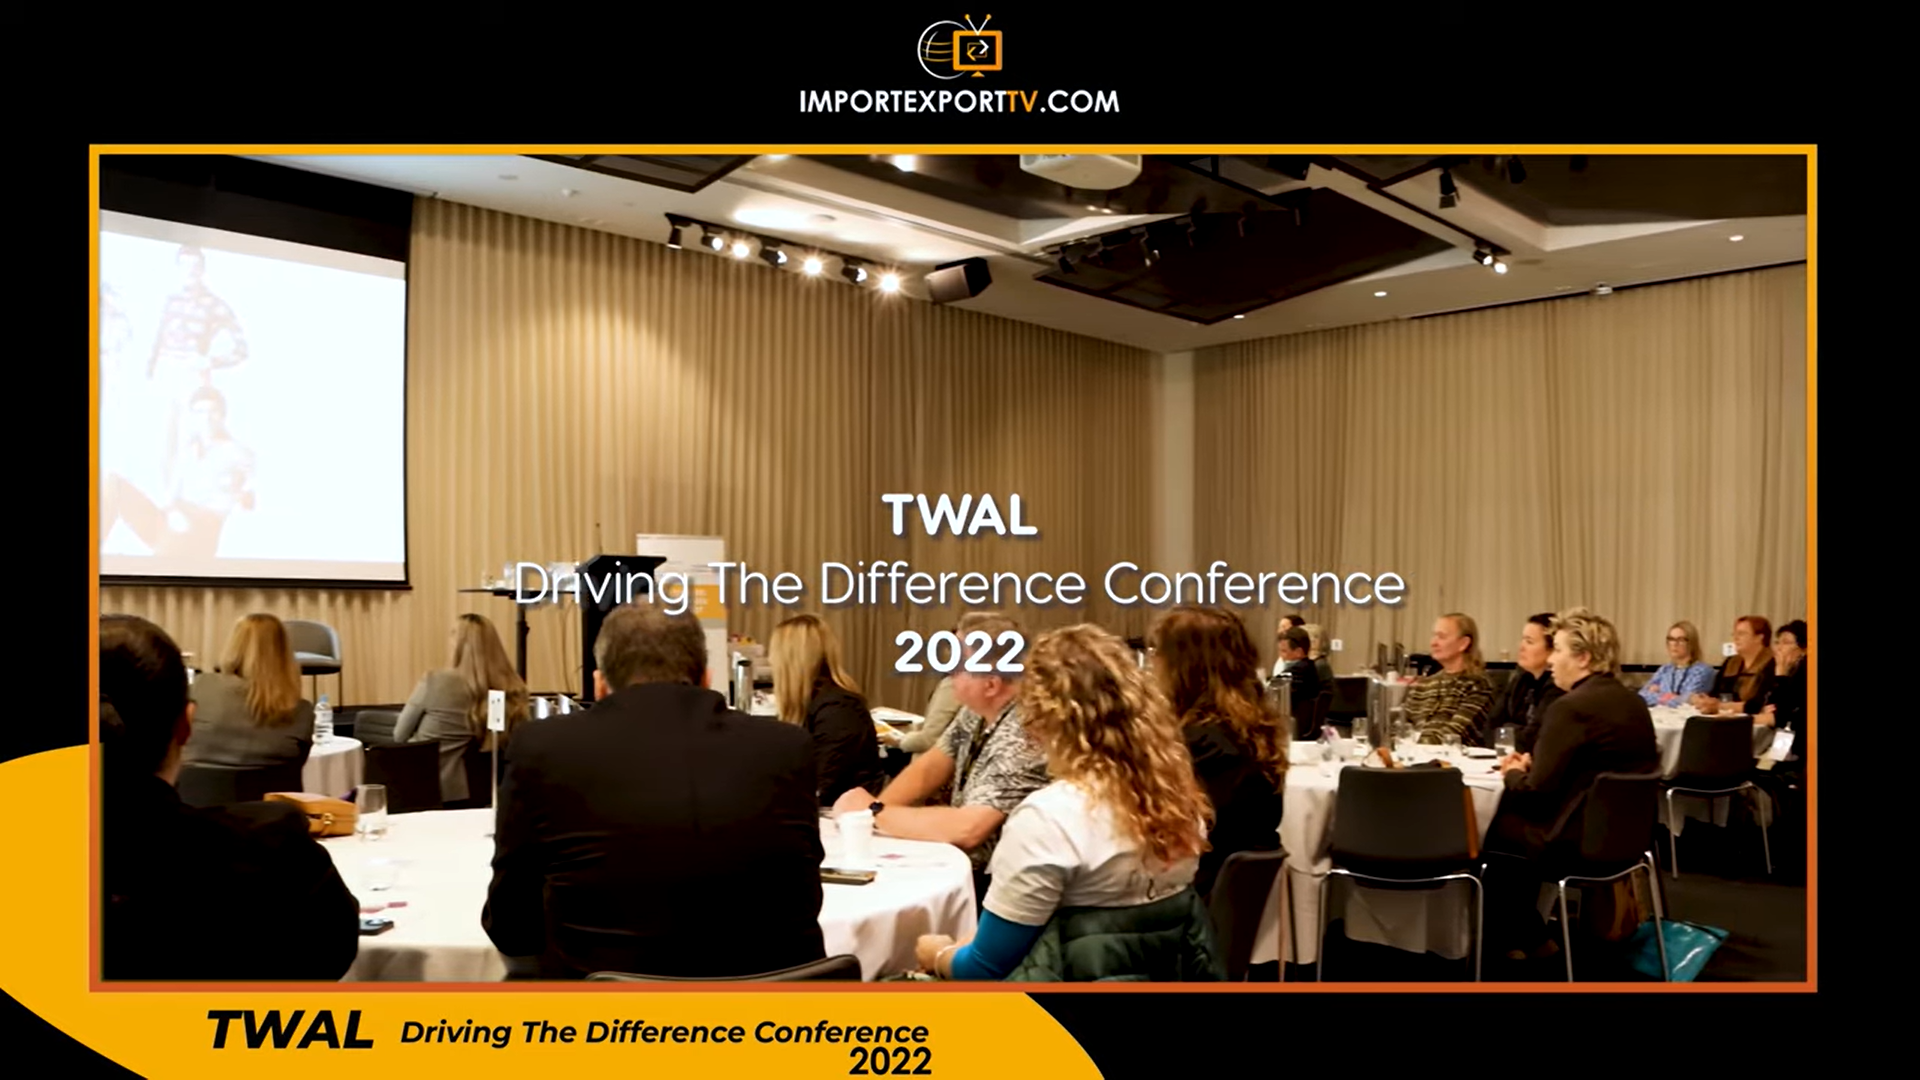 TWAL - Driving the Difference Conference 2022